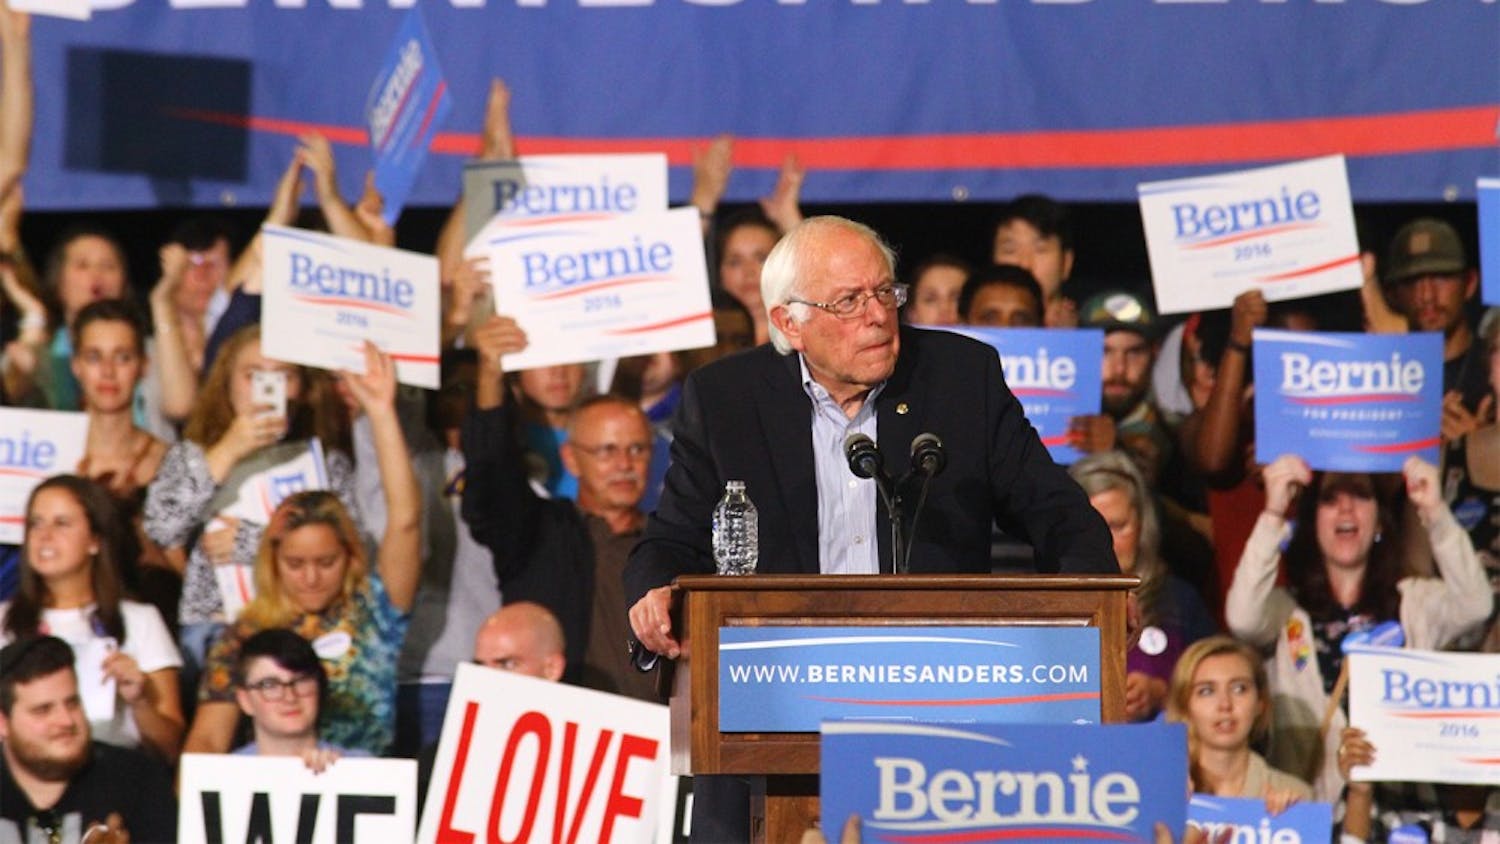 Supporters of presidential candidate Bernie Sanders attend a rally on Sept. 13, 2015 in Greensboro.